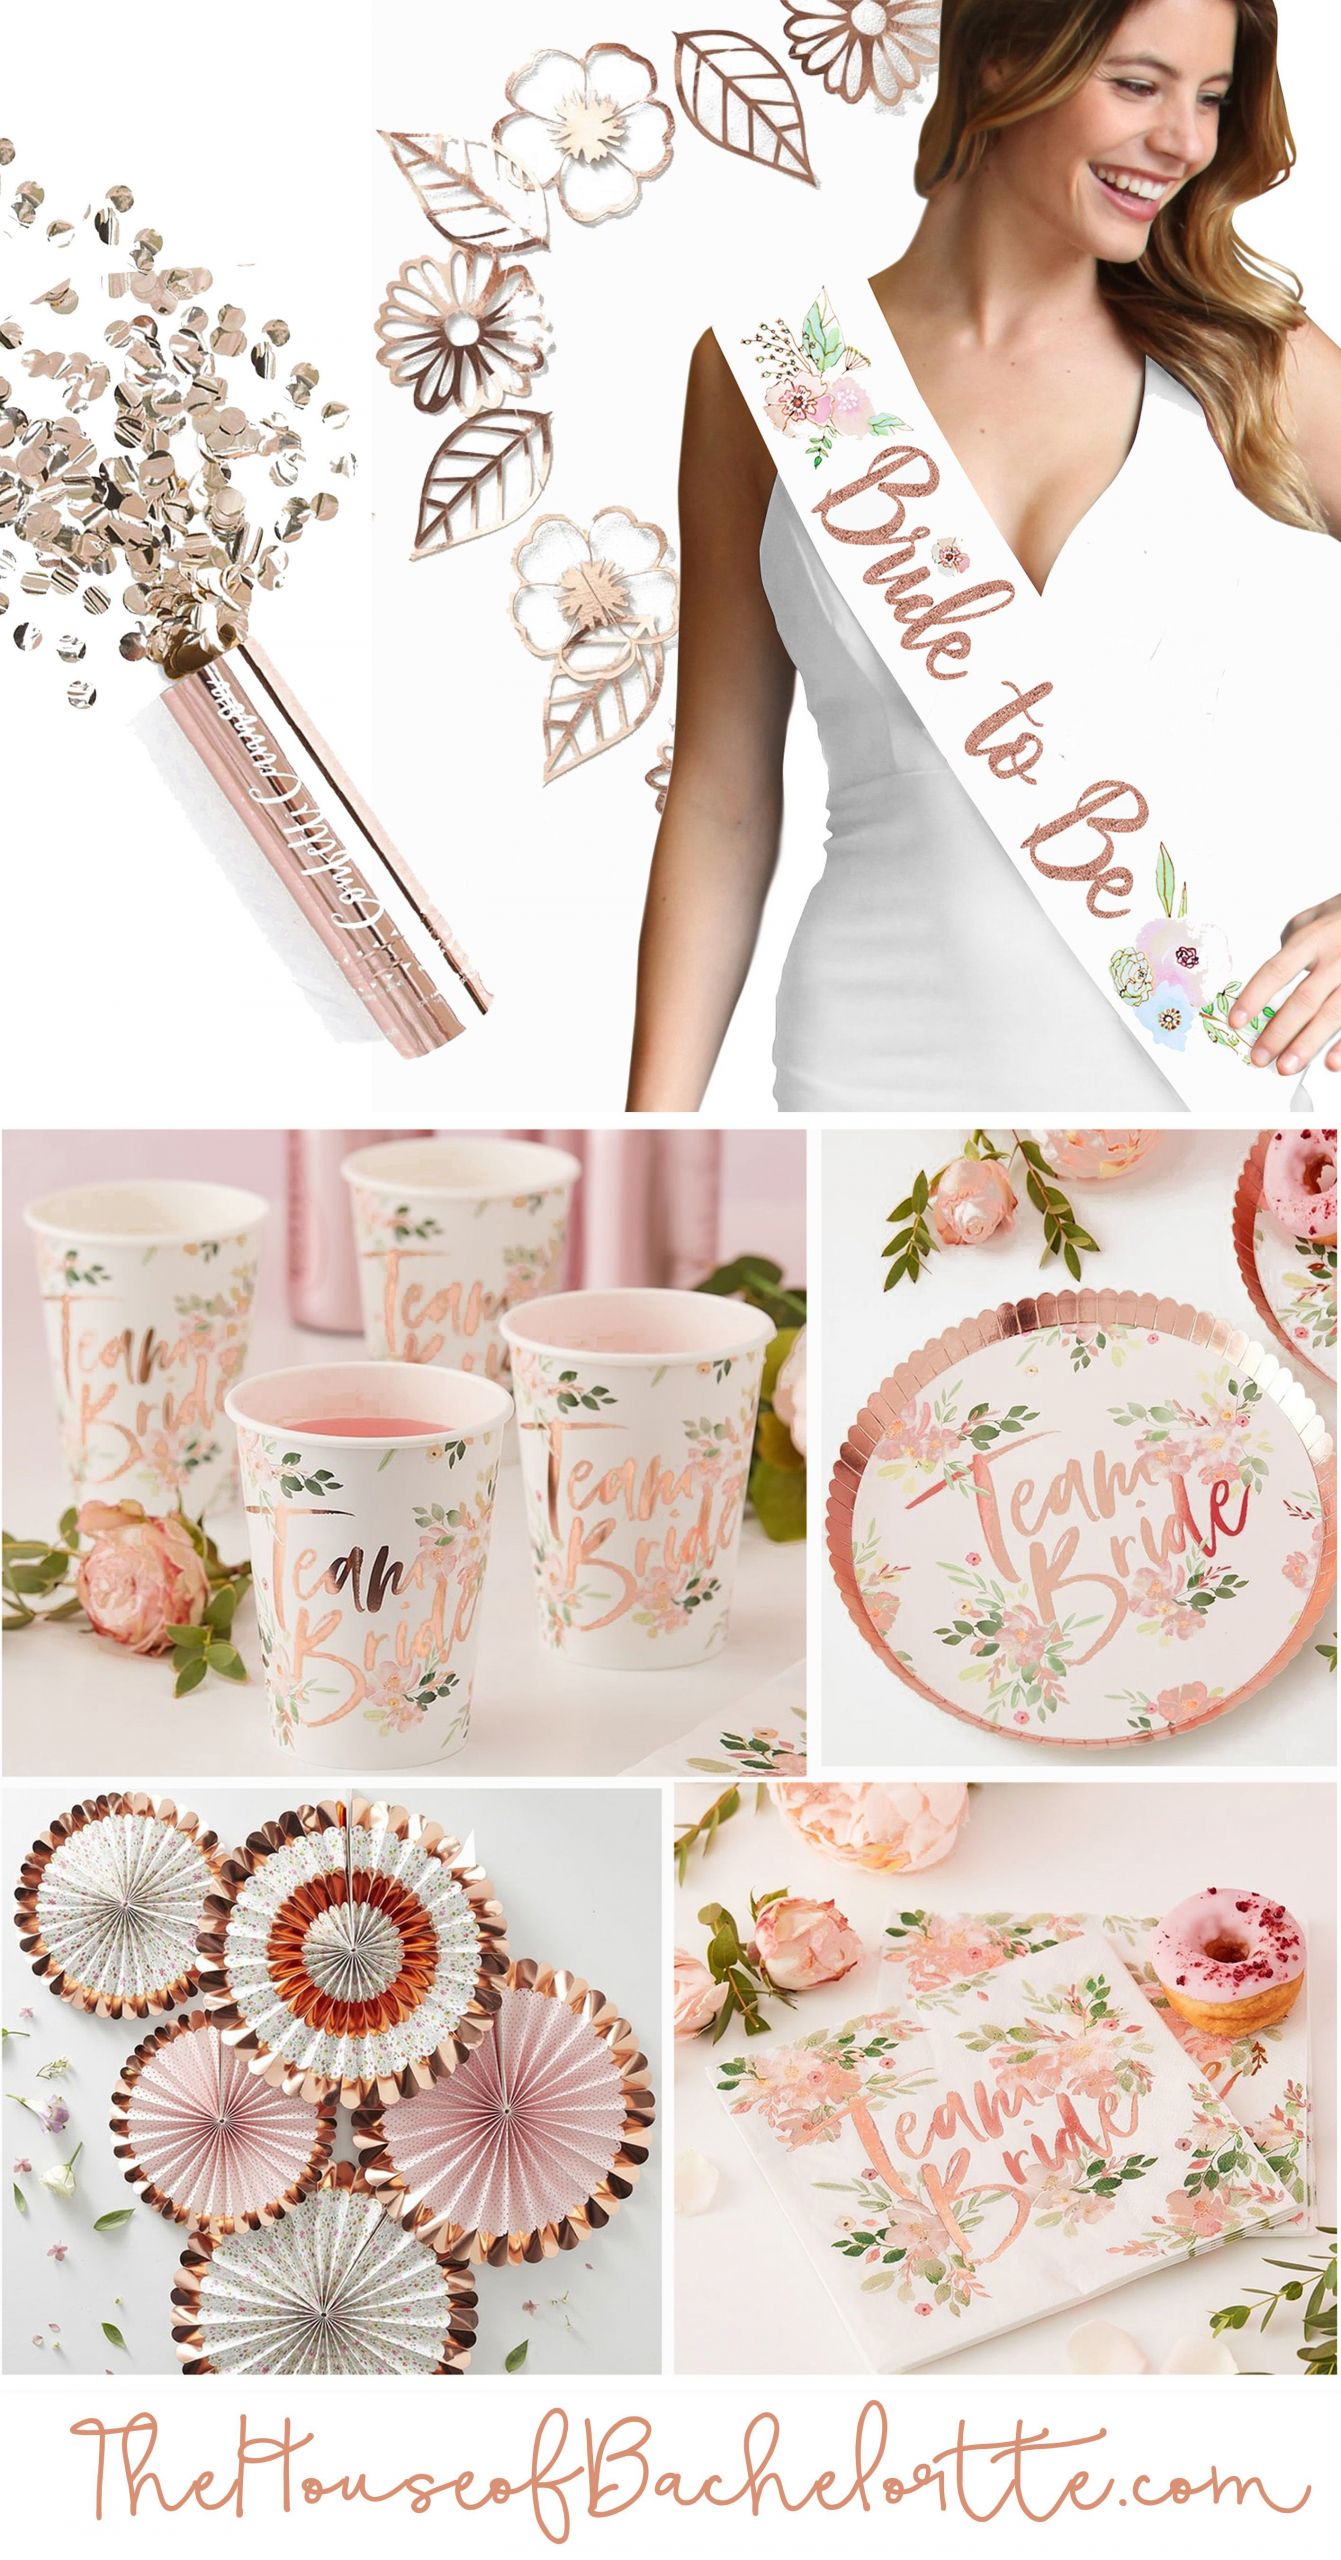 Combined Bridal Shower And Bachelorette Party Ideas
 Classy elegant and beautiful shimmering rose gold and